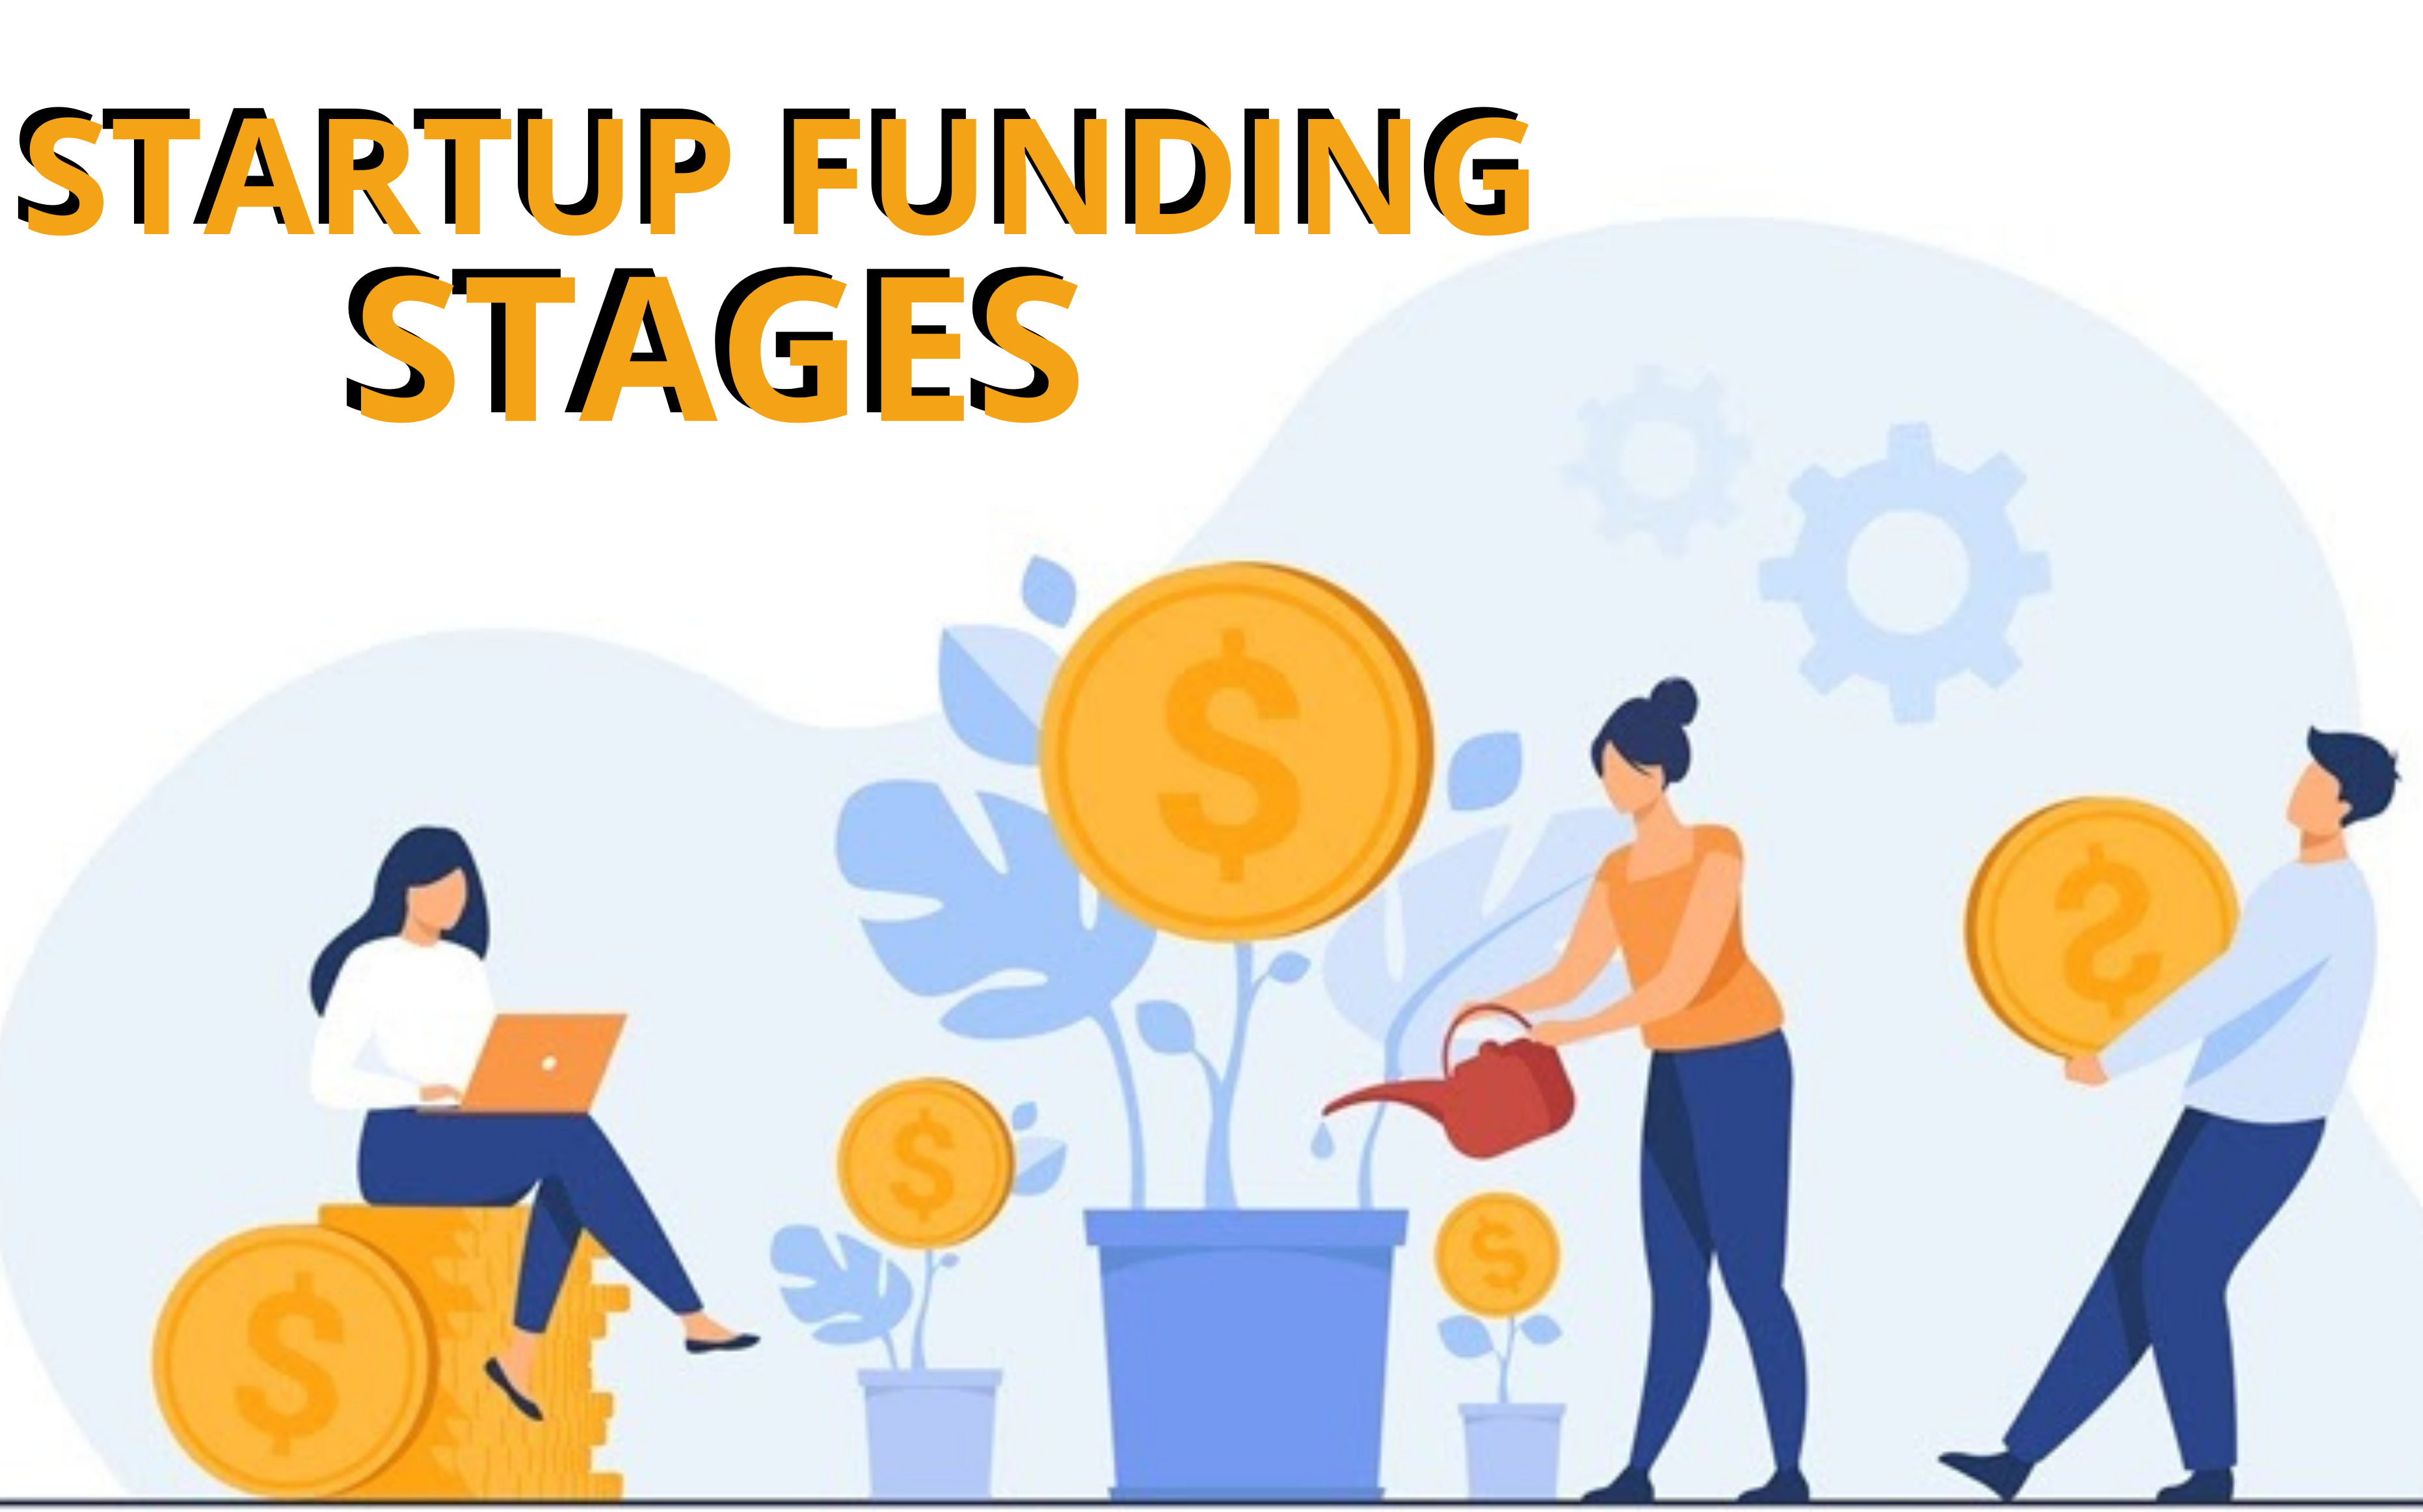 A Step By Step Illustration of Startup Funding Stages - ALCOR FUND